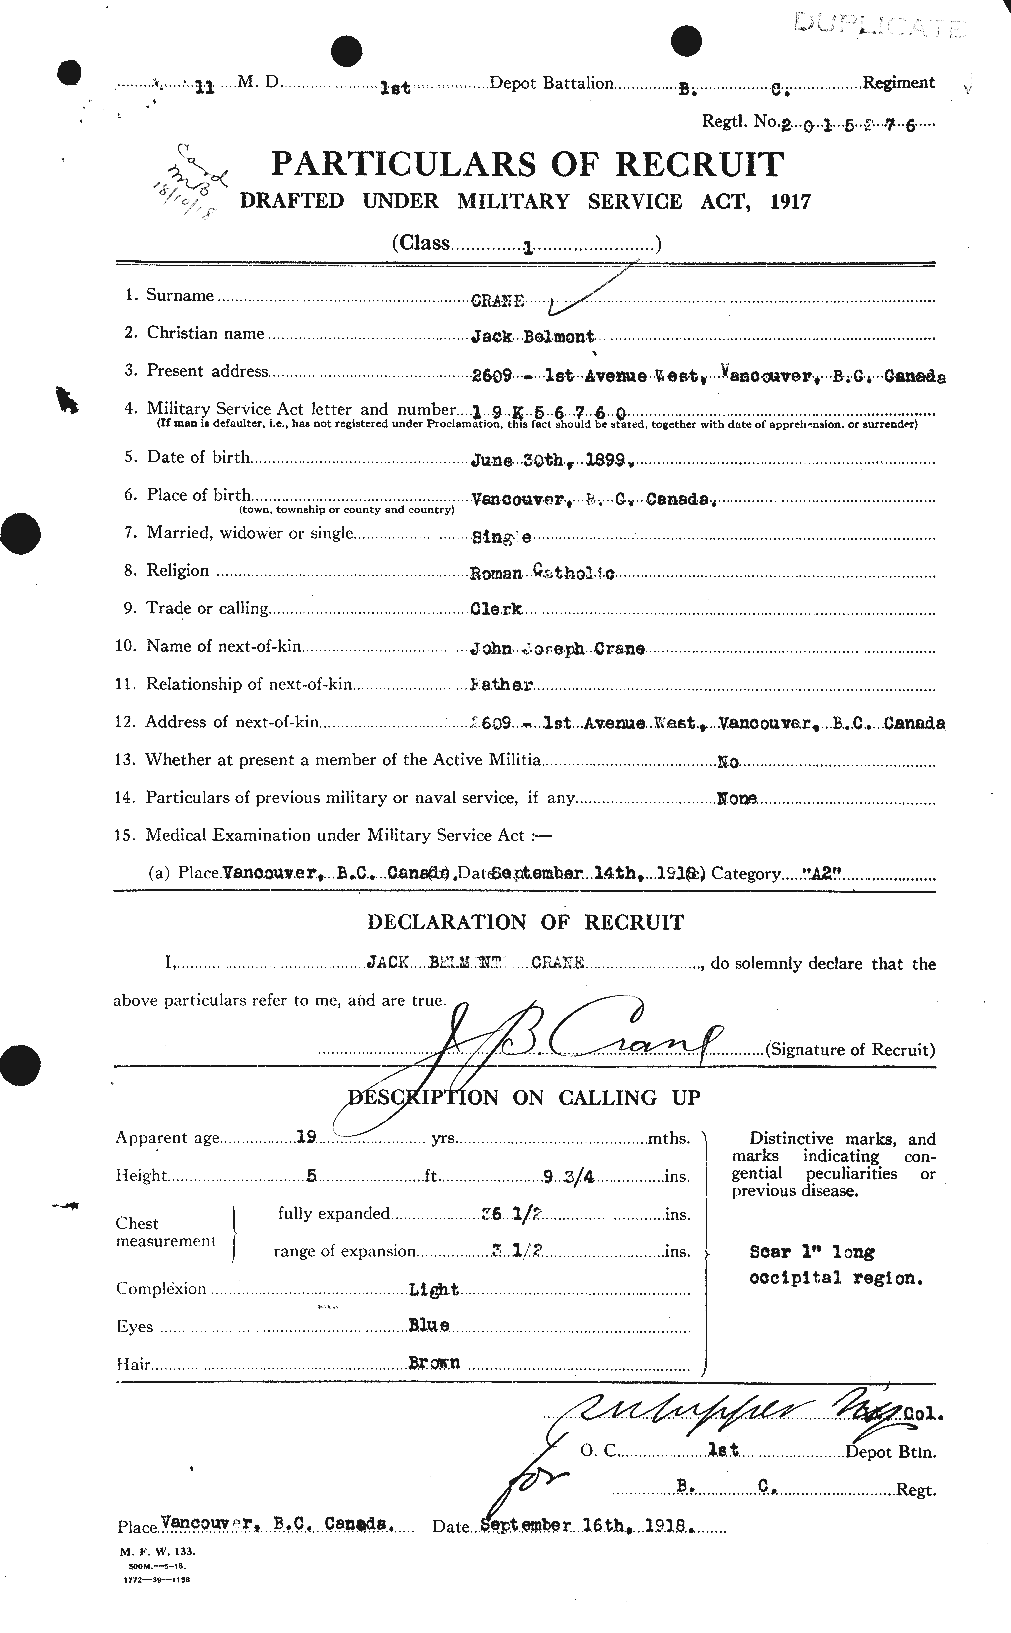 Personnel Records of the First World War - CEF 061994a